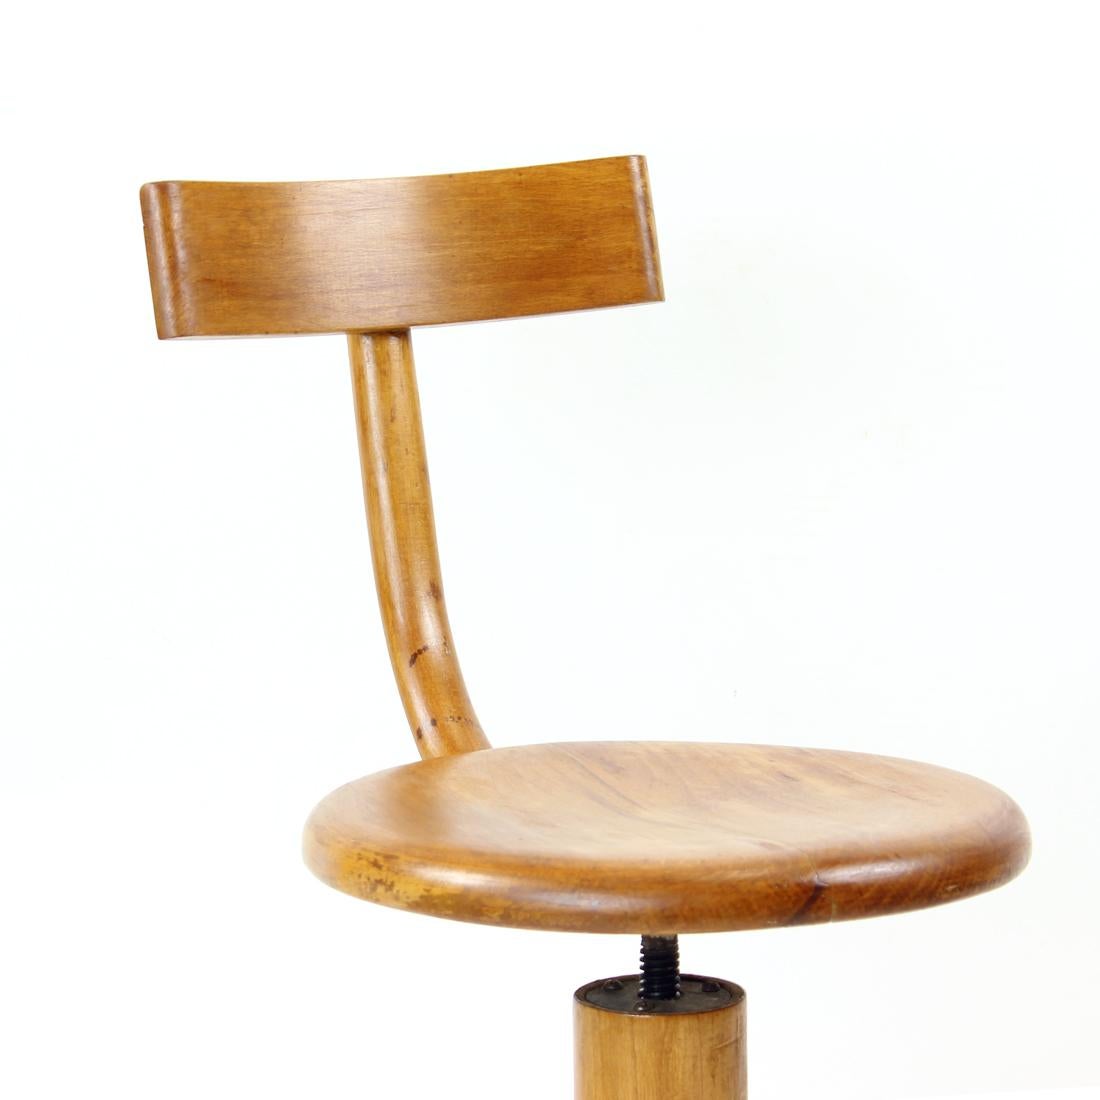 Original and unique piano stool produced with a backrest in Mid-Century Modern period of Czech design. Original design by Thonet, produced by TON in Czechoslovakia. The stool is made of hard oak wood. Hight adjustable by turning from 44cm, up to